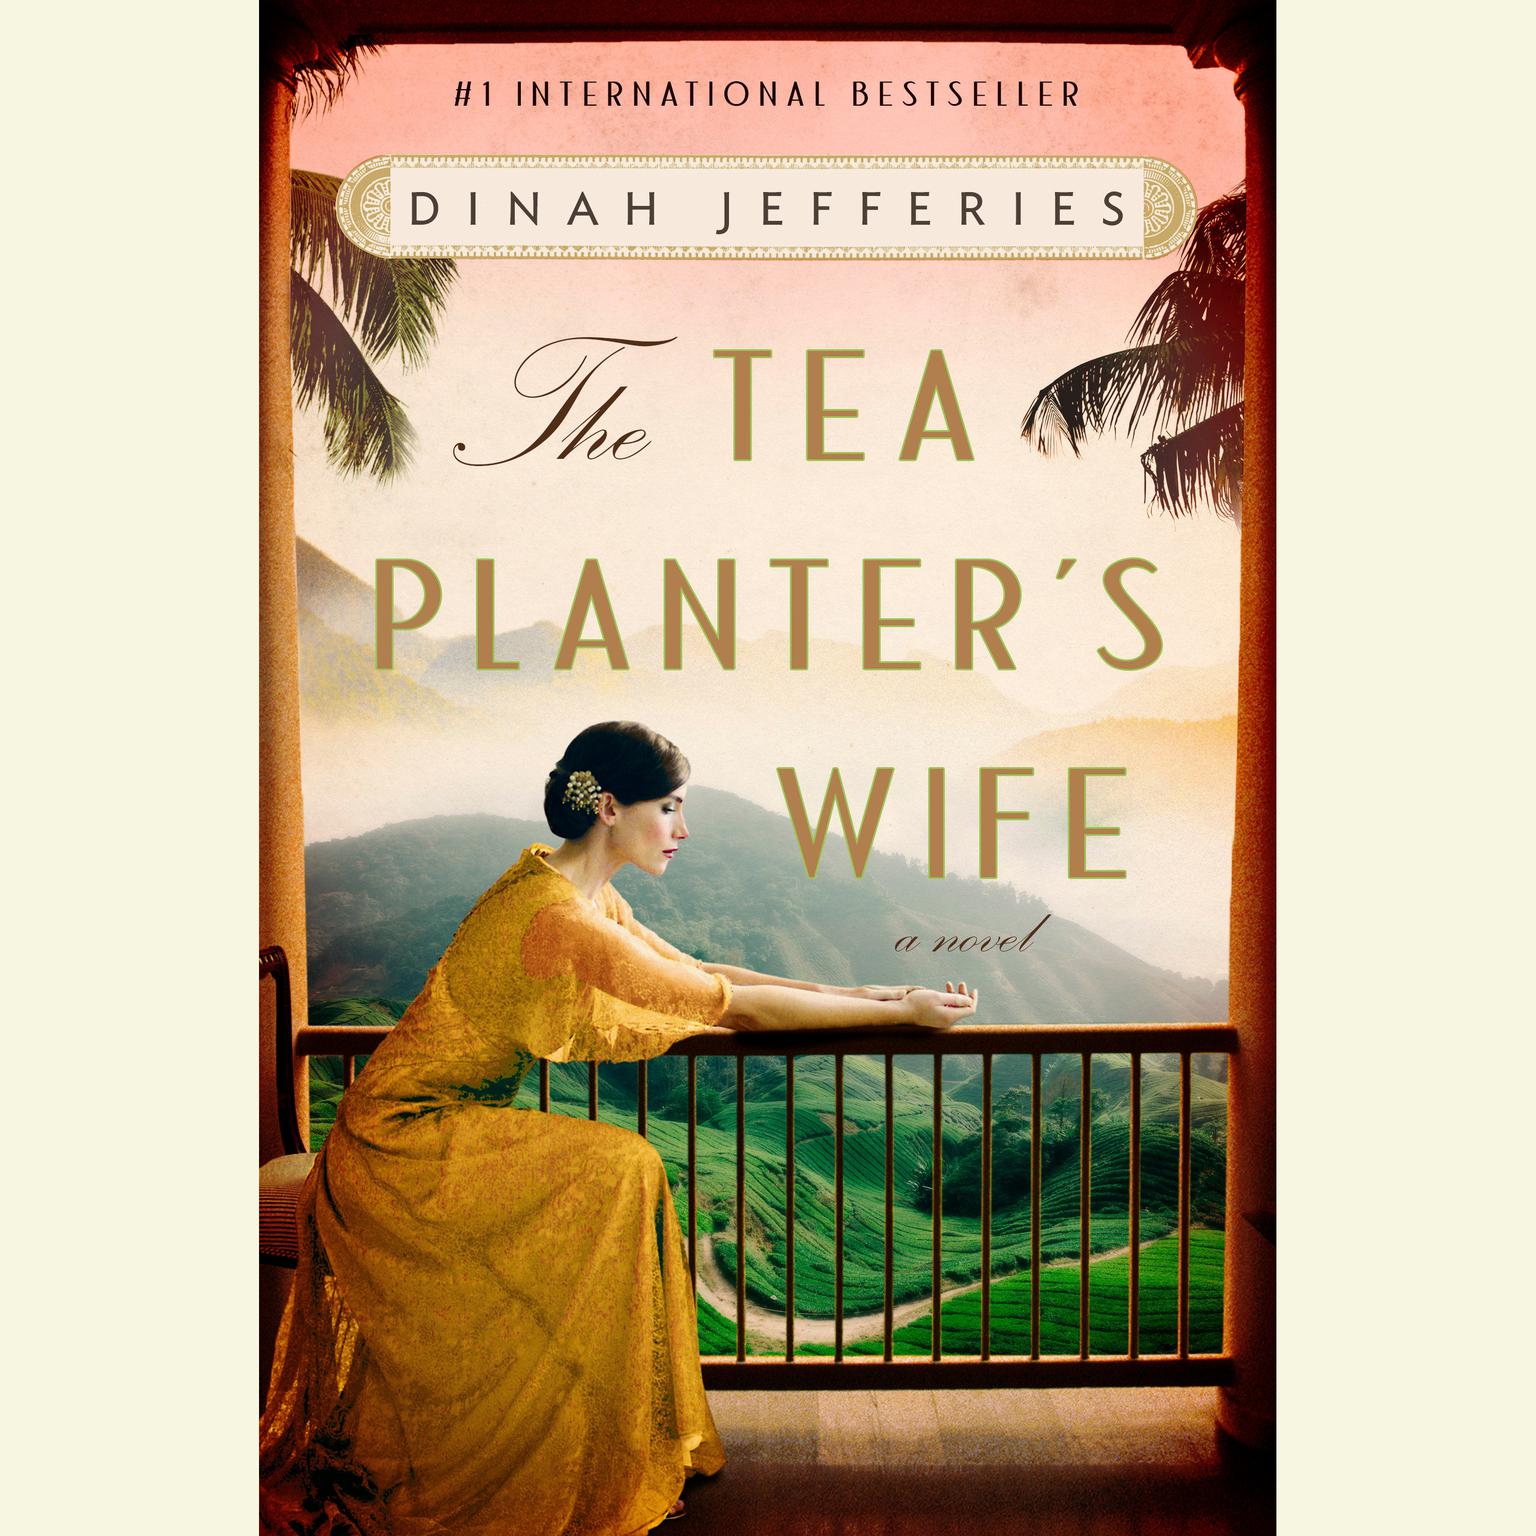 The Tea Planters Wife: A Novel Audiobook, by Dinah Jefferies